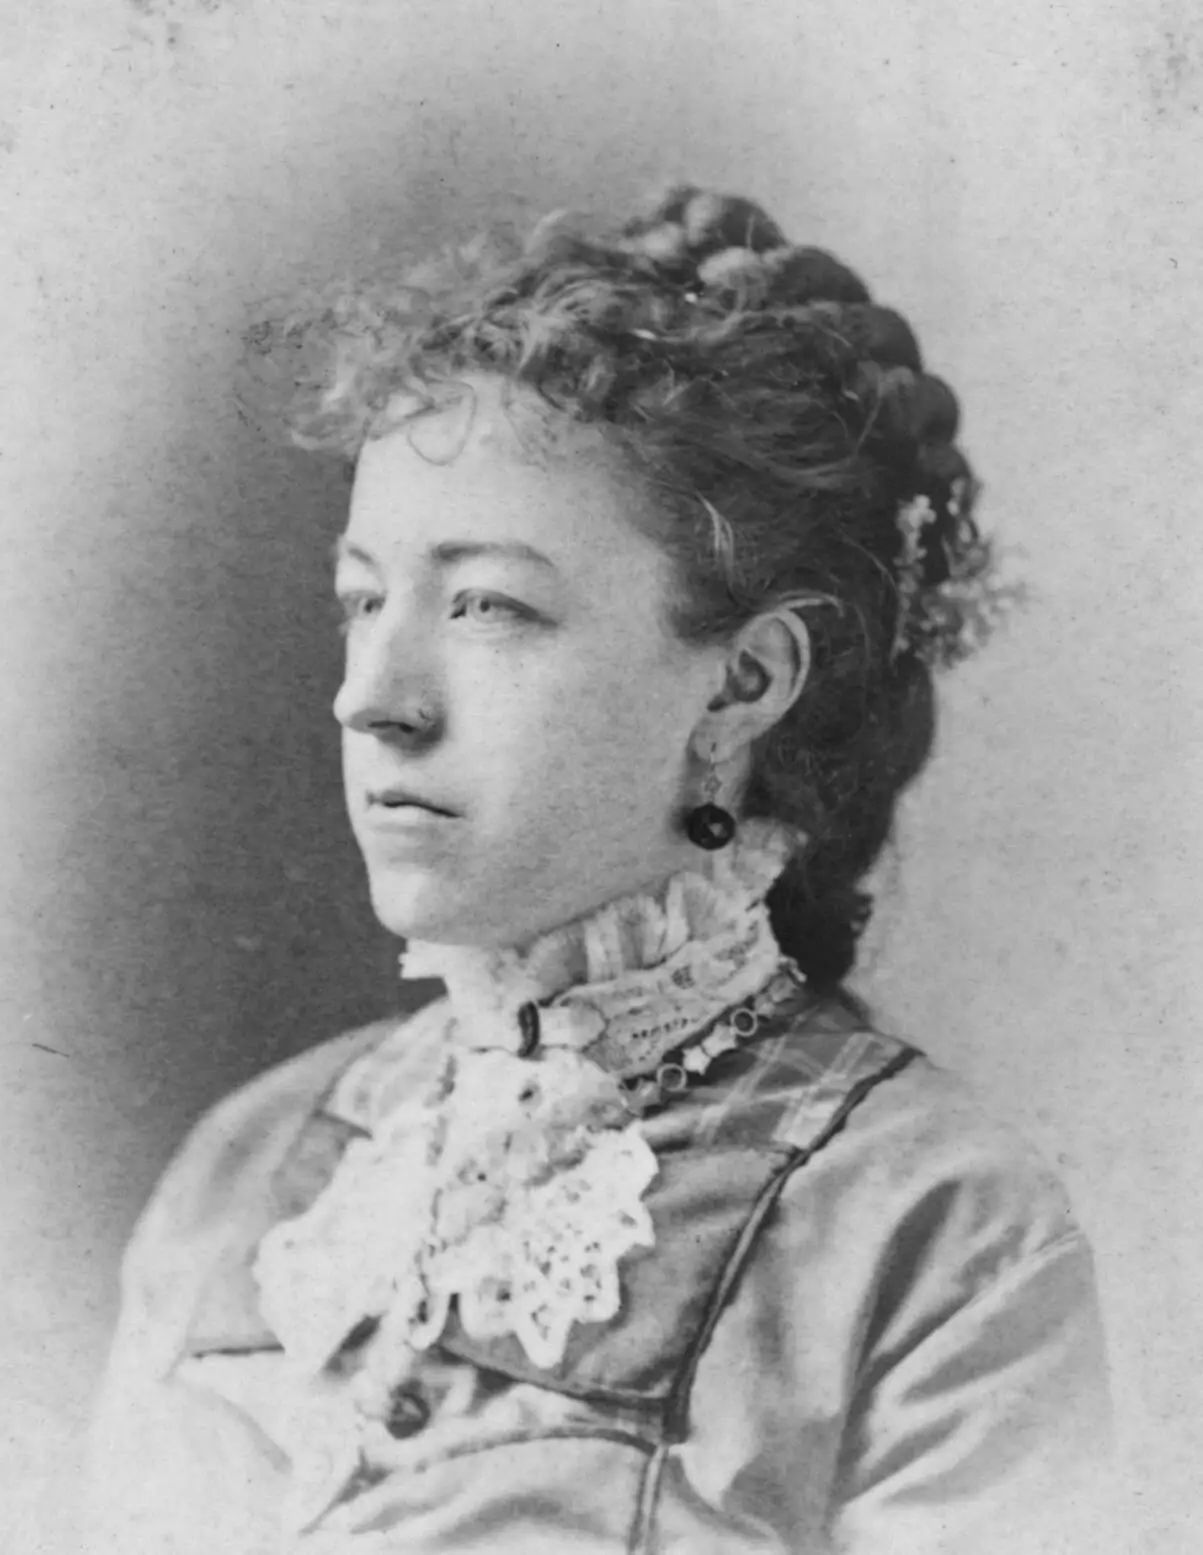 Portrait of Alice Fell, a white woman wearing a long-sleeve dress with lace collar, charm necklace, and gem-like earrings. Her dark hair is pulled back and she has a serious look.